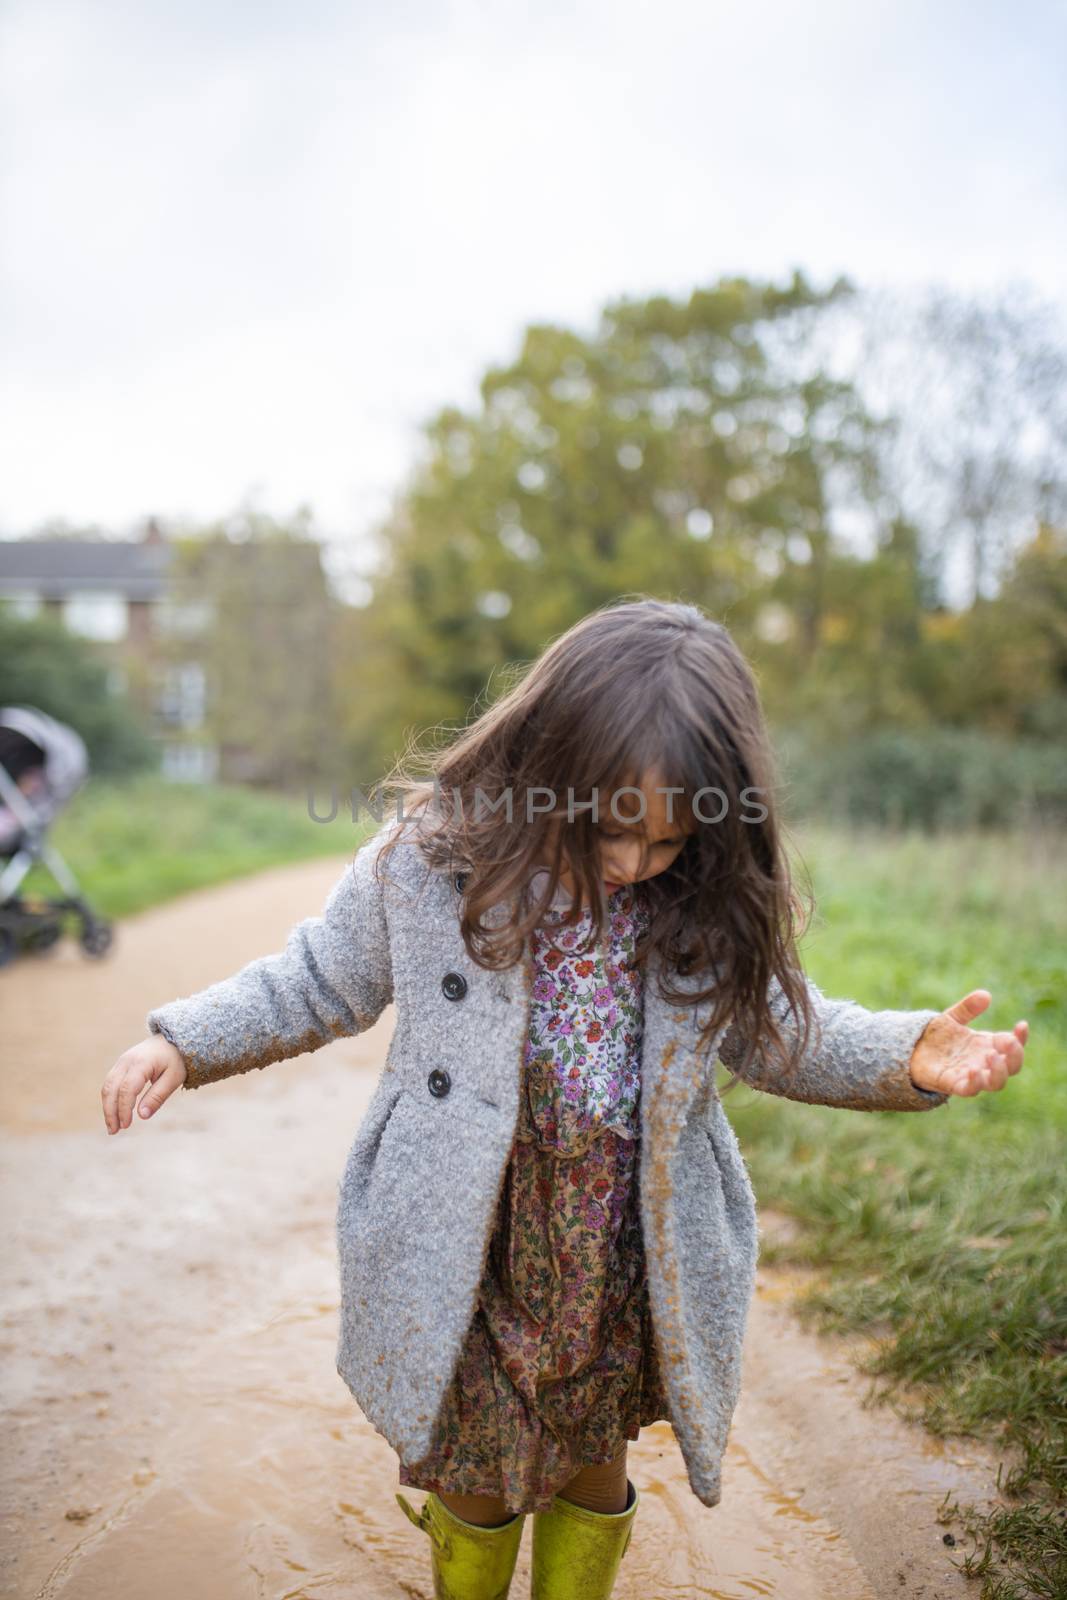 Little girl looking at her muddy clothes after jumping in a puddle by Kanelbulle